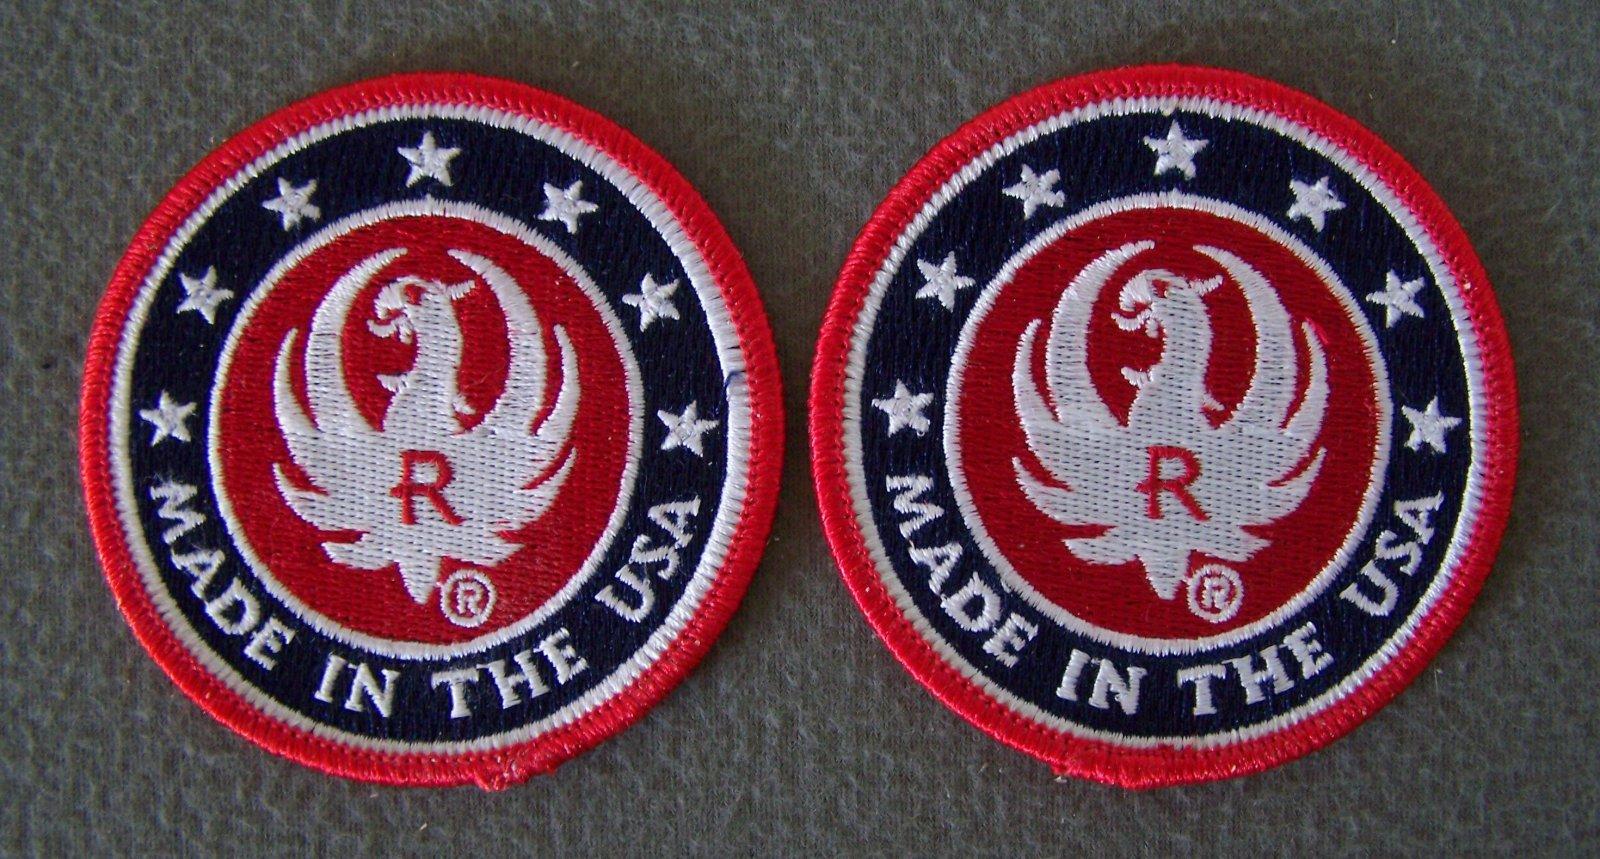 RUGER LOGO PATCH ARMS MAKER FOR RESPONSIBLE CITIZENS HOOK/LOOP BACKING